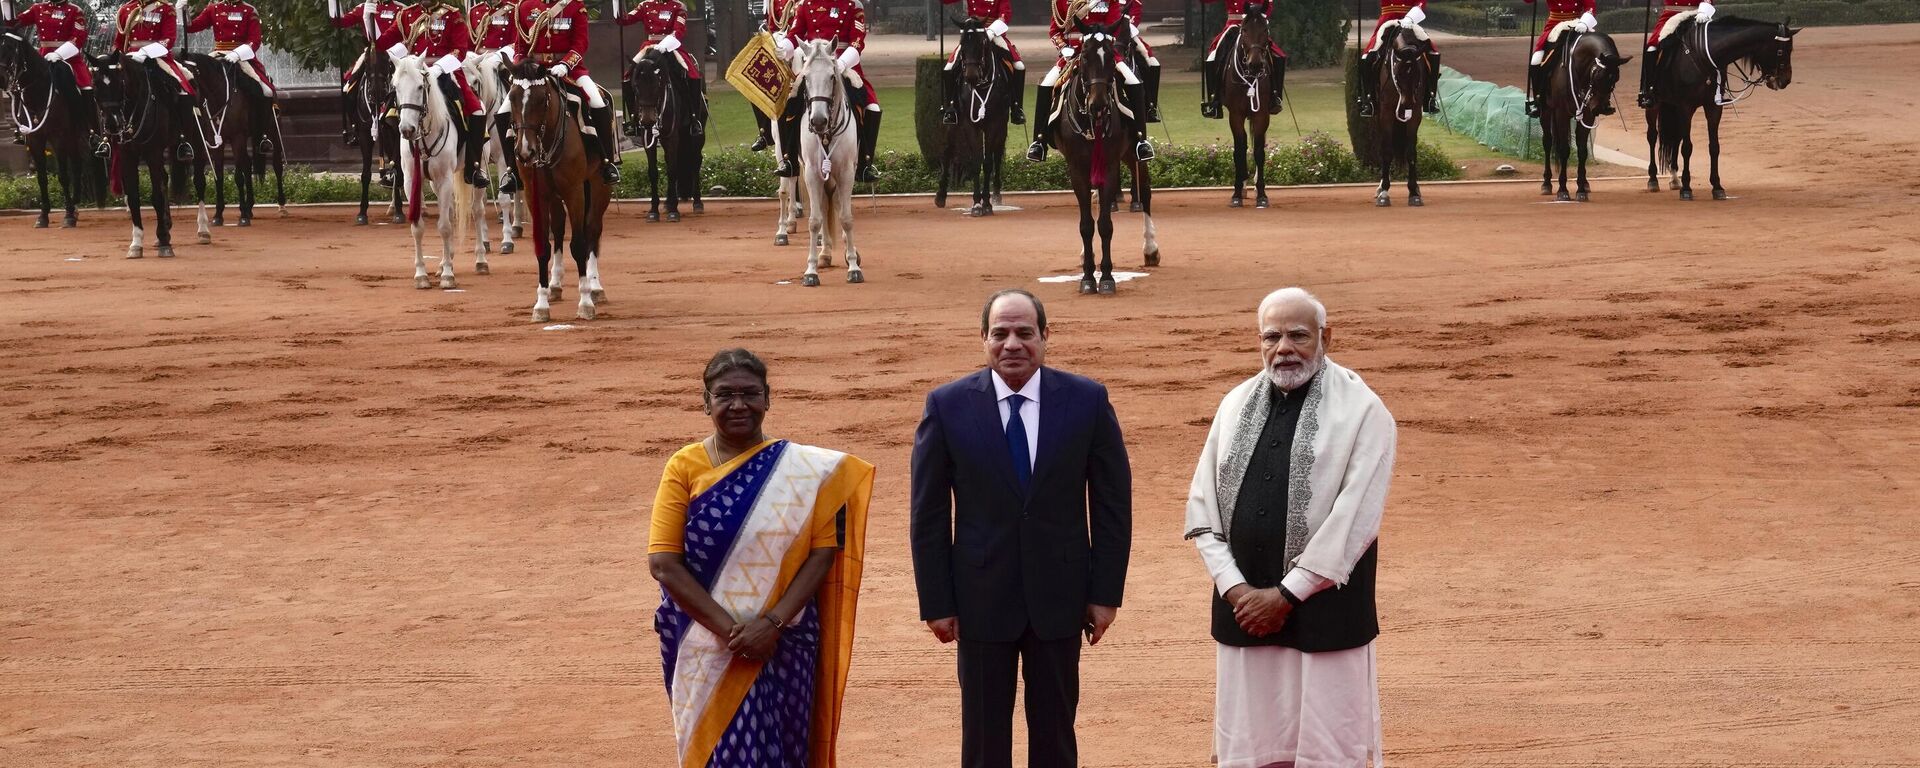 Indian Prime Minister Narendra Modi, right, and President Draupadi Murmu, left, stand with Egyptian President Abdel Fattah El-Sisi at a ceremonial reception for the latter in New Delhi, India, Wednesday, Jan. 25, 2023. - Sputnik India, 1920, 16.05.2023